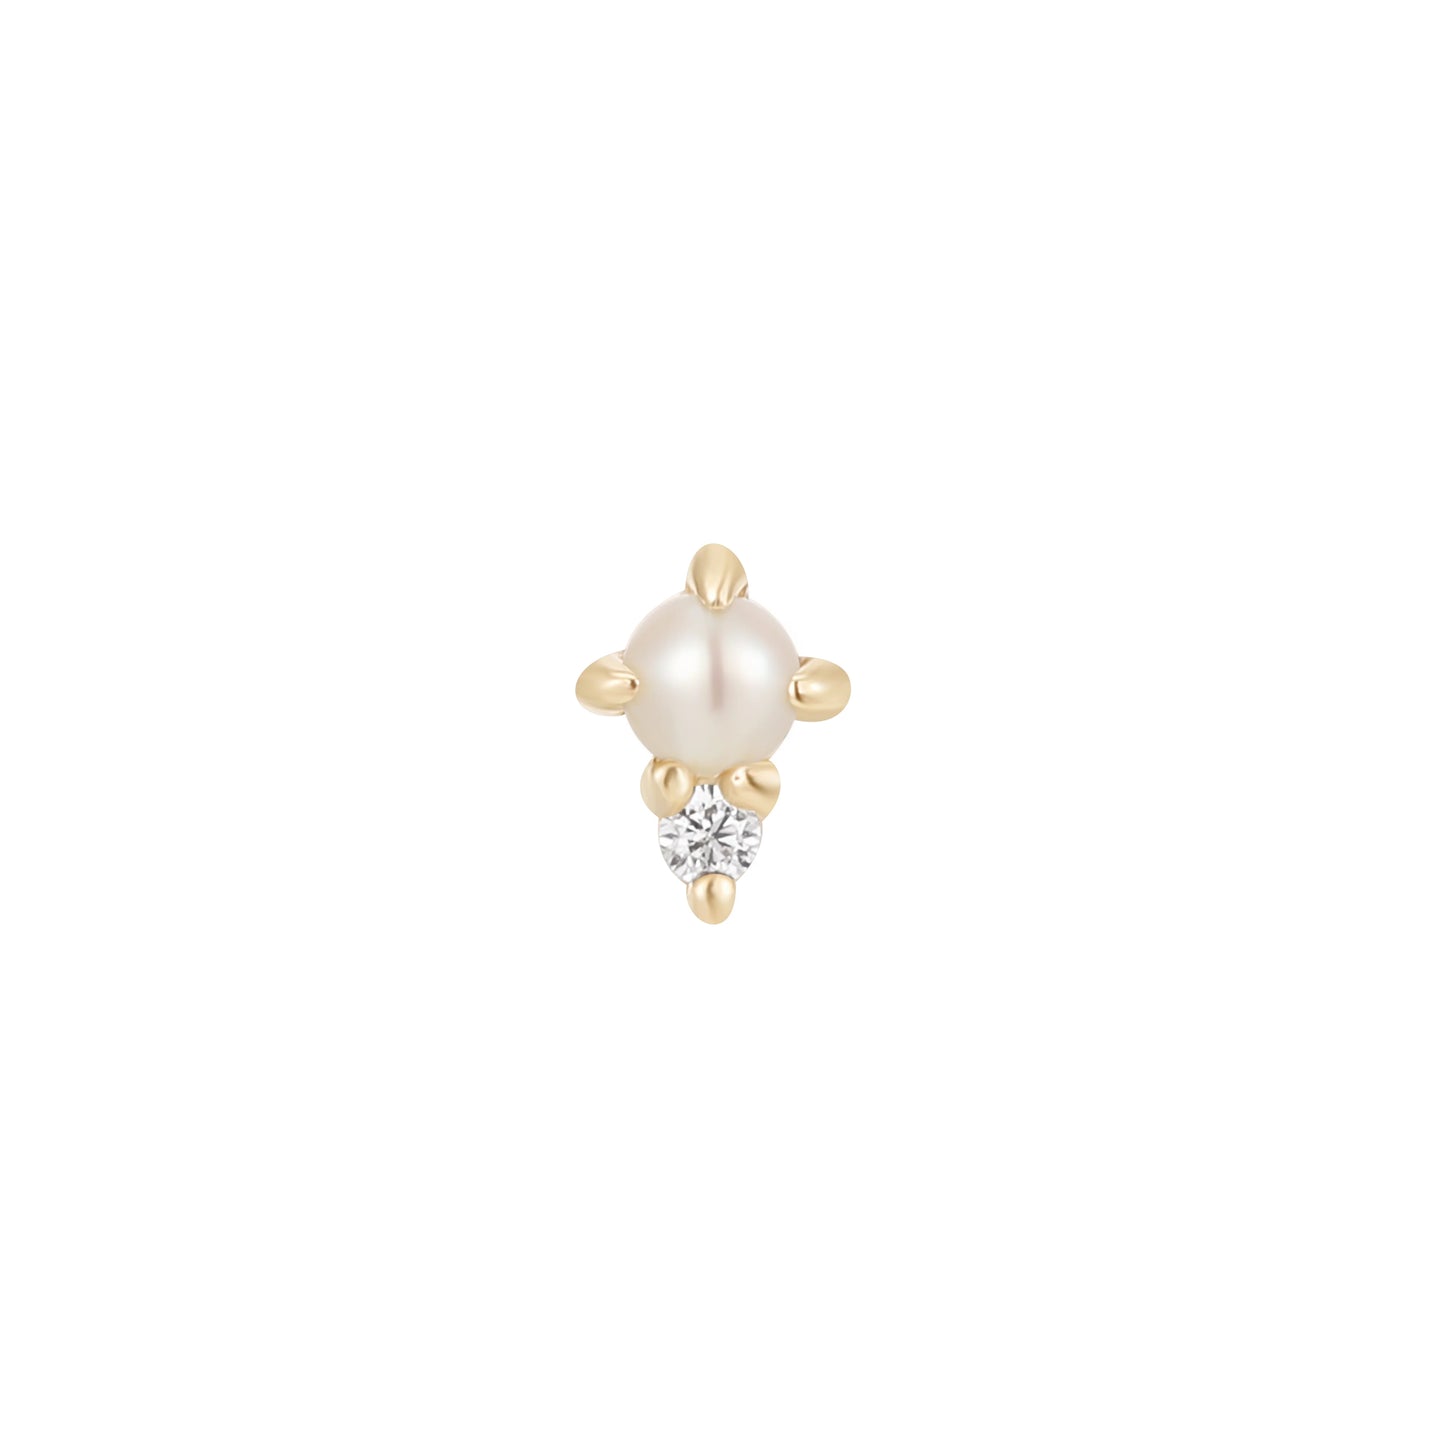 The Light Genuine SaltWater Pearl & Cubic Zirconia Threadless End